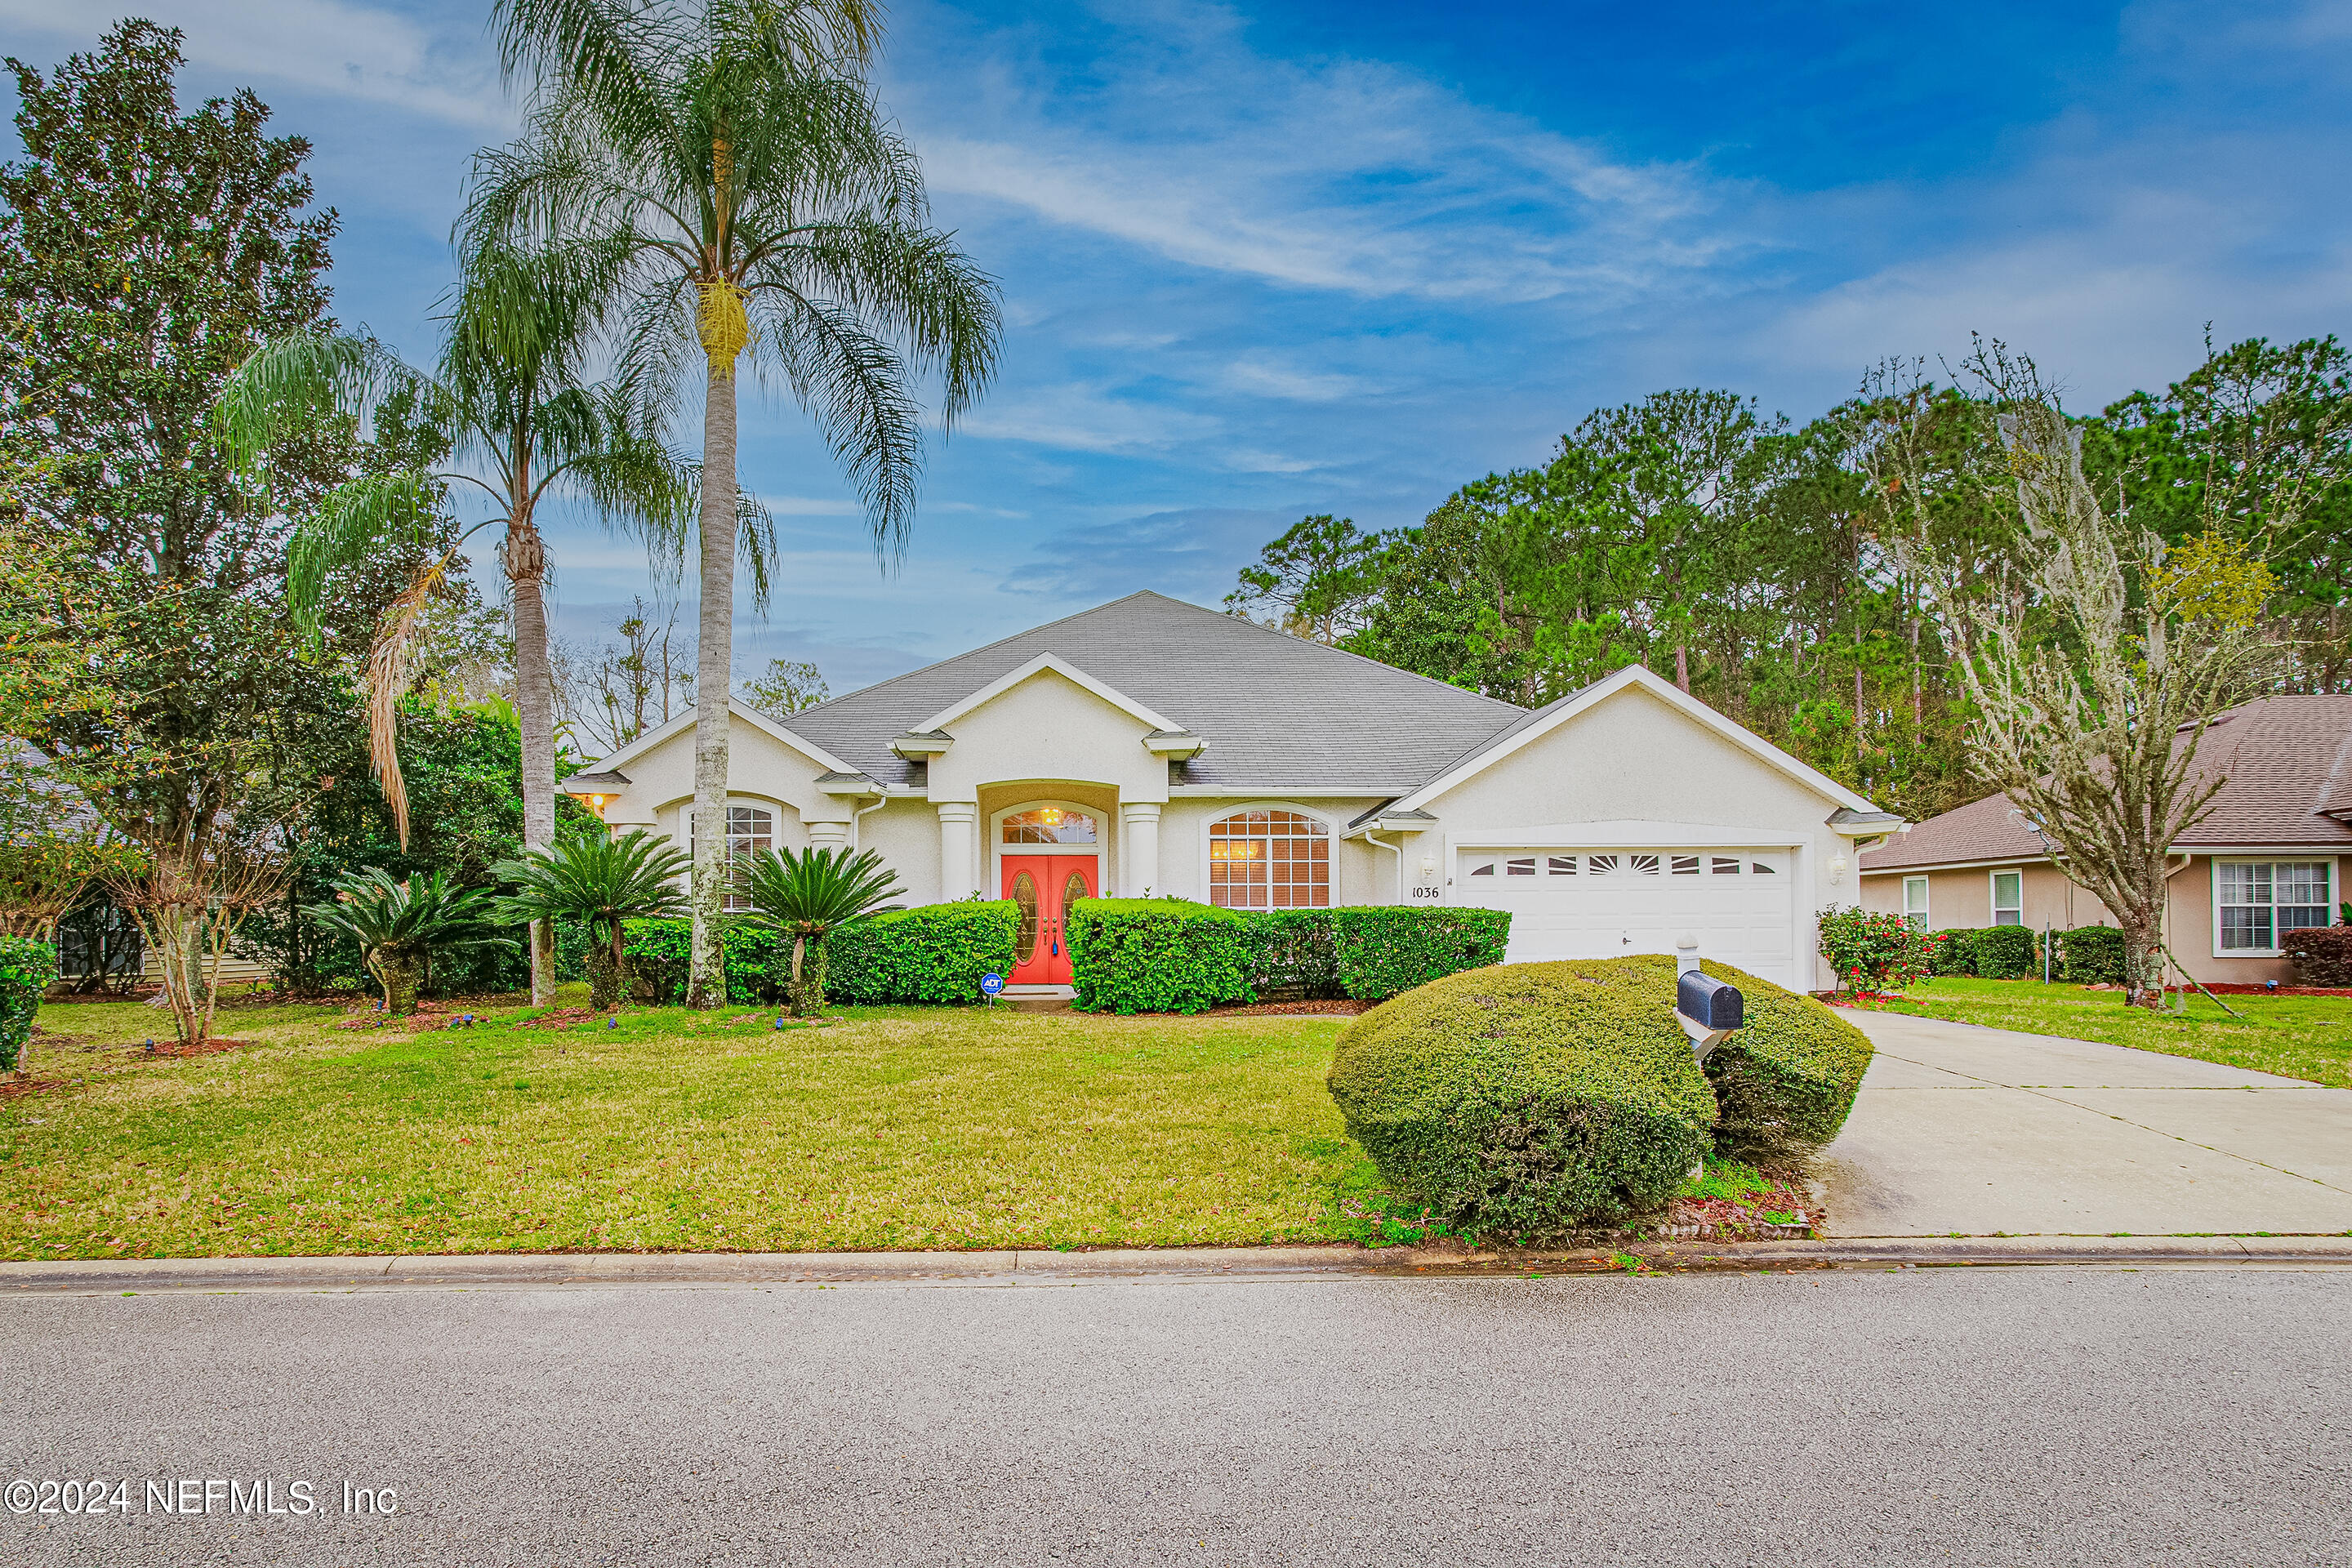 St Johns, FL home for sale located at 1036 DURBIN PARKE Drive, St Johns, FL 32259